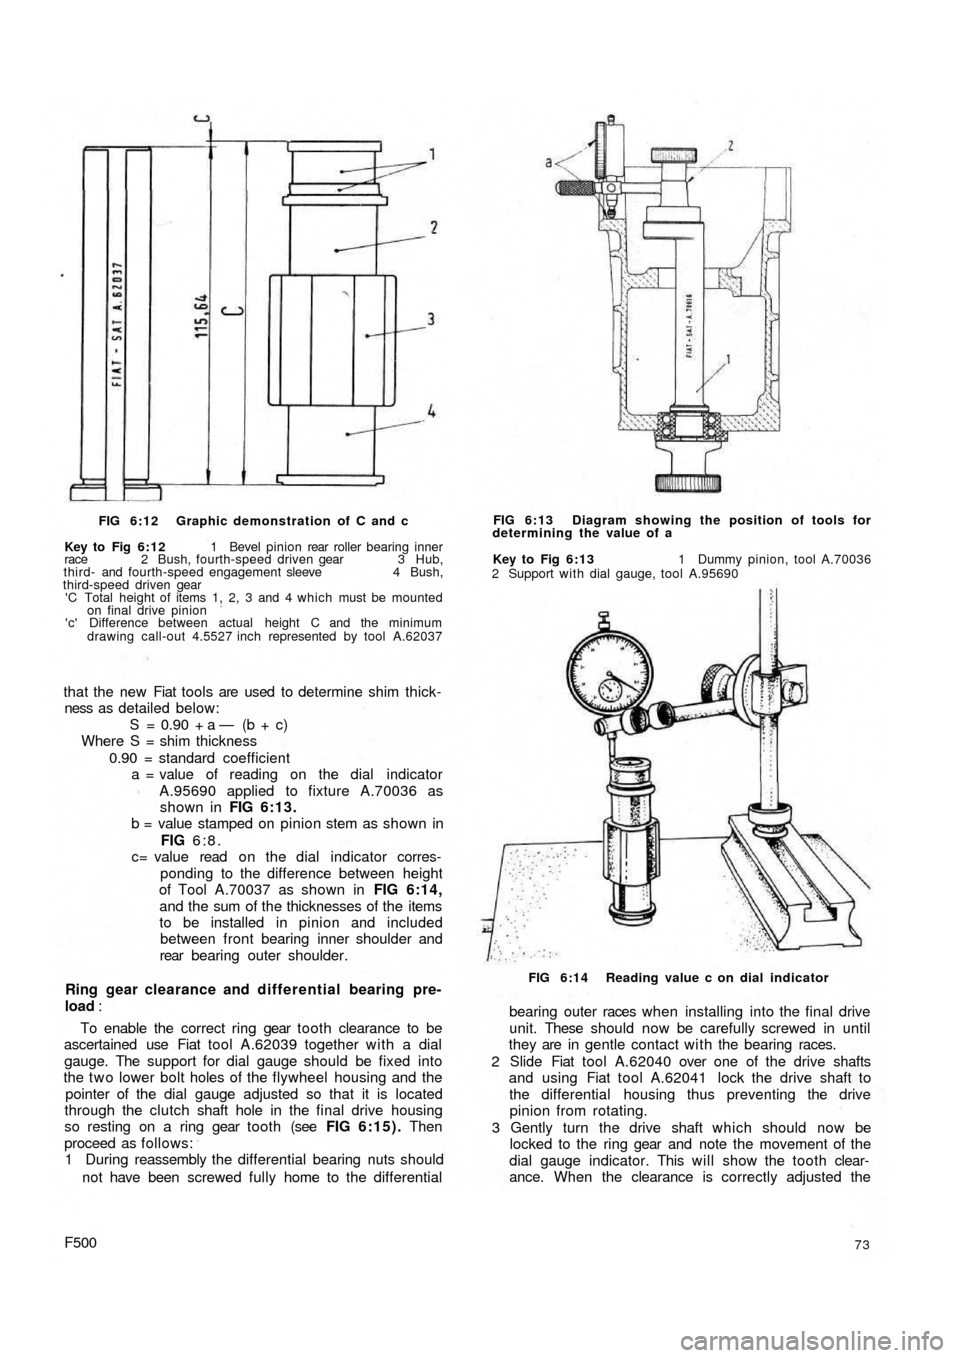 FIAT 500 1957 1.G Repair Manual FIG 6:12 Graphic demonstration  of C and c
Key to Fig 6:12 1 Bevel pinion rear roller bearing inner
race 2 Bush, fourth-speed driven gear 3 Hub,
third- and fourth-speed engagement sleeve 4 Bush,
third